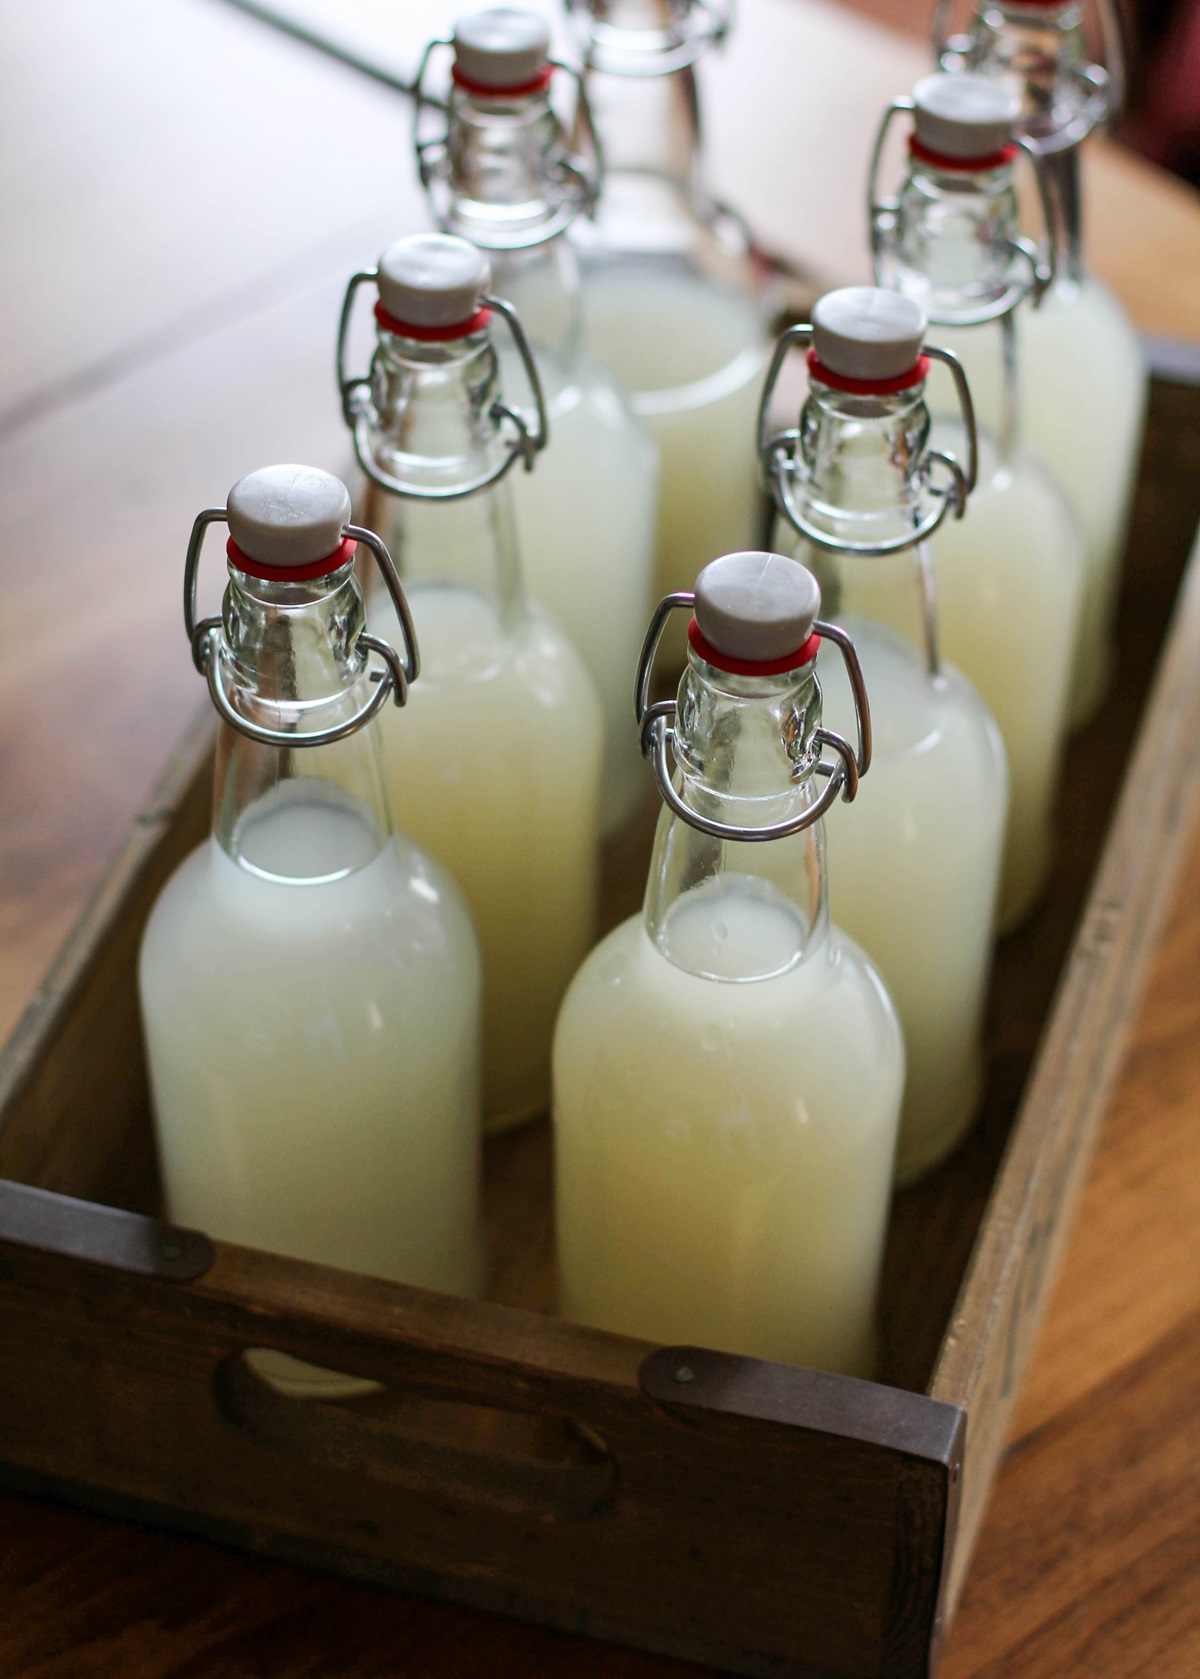 How to Make Probiotic Ginger Beer - a naturally fermented probiotic-rich beverage that you can brew at home using minimal equipment! | TheRoastedRoot.net